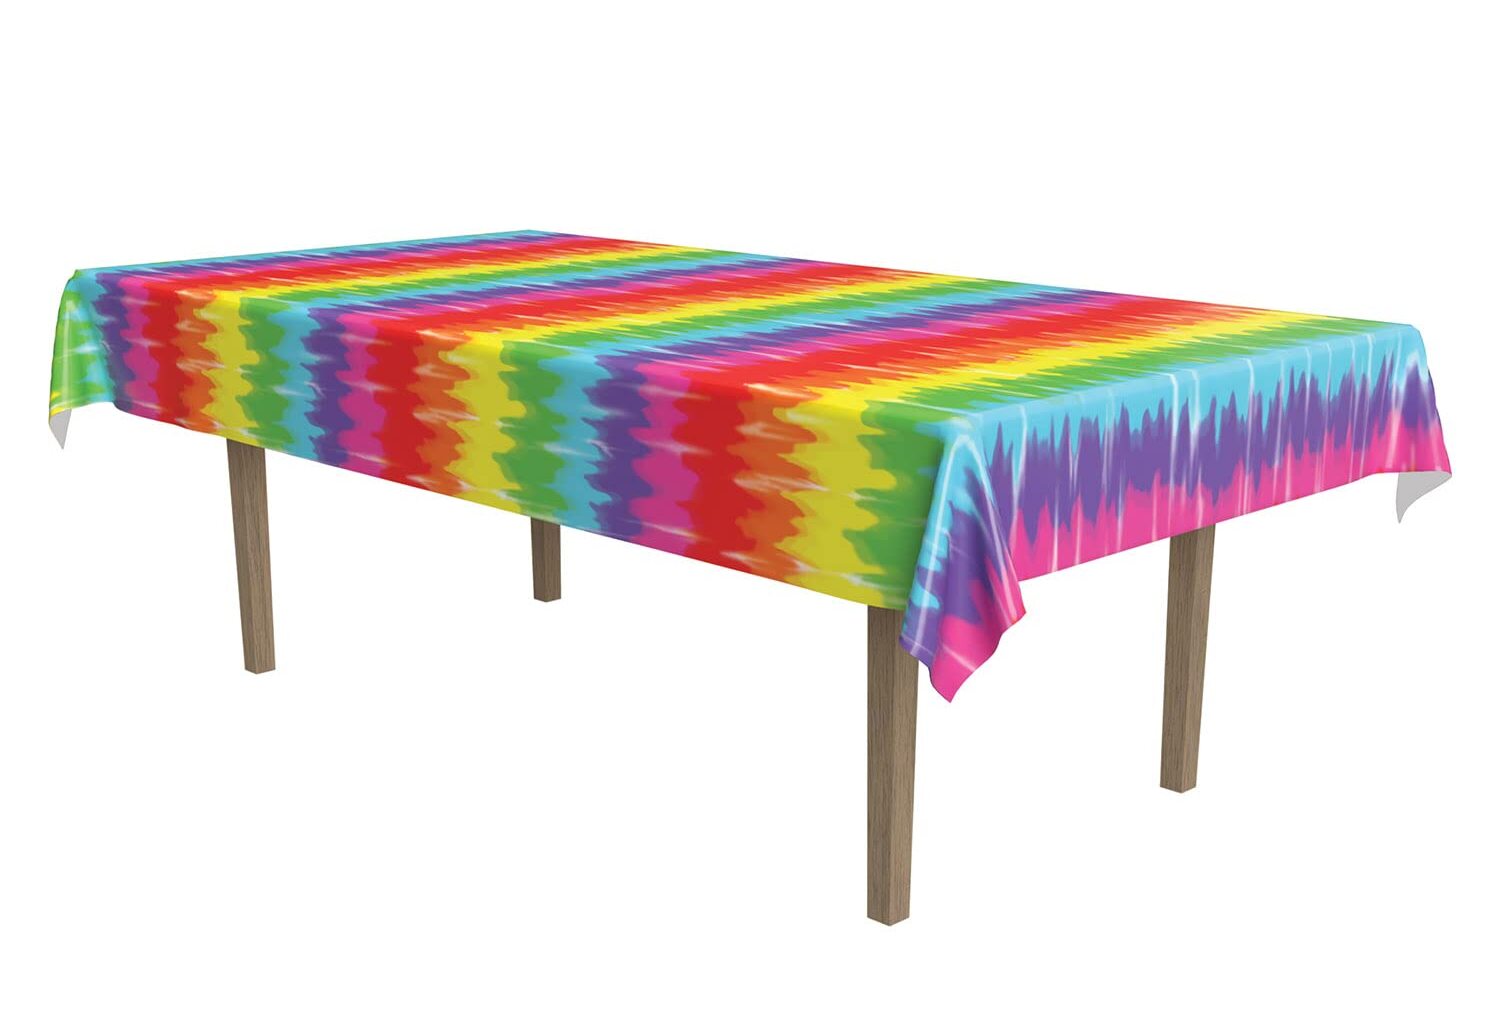 How To Tie-Dye A Tablecloth